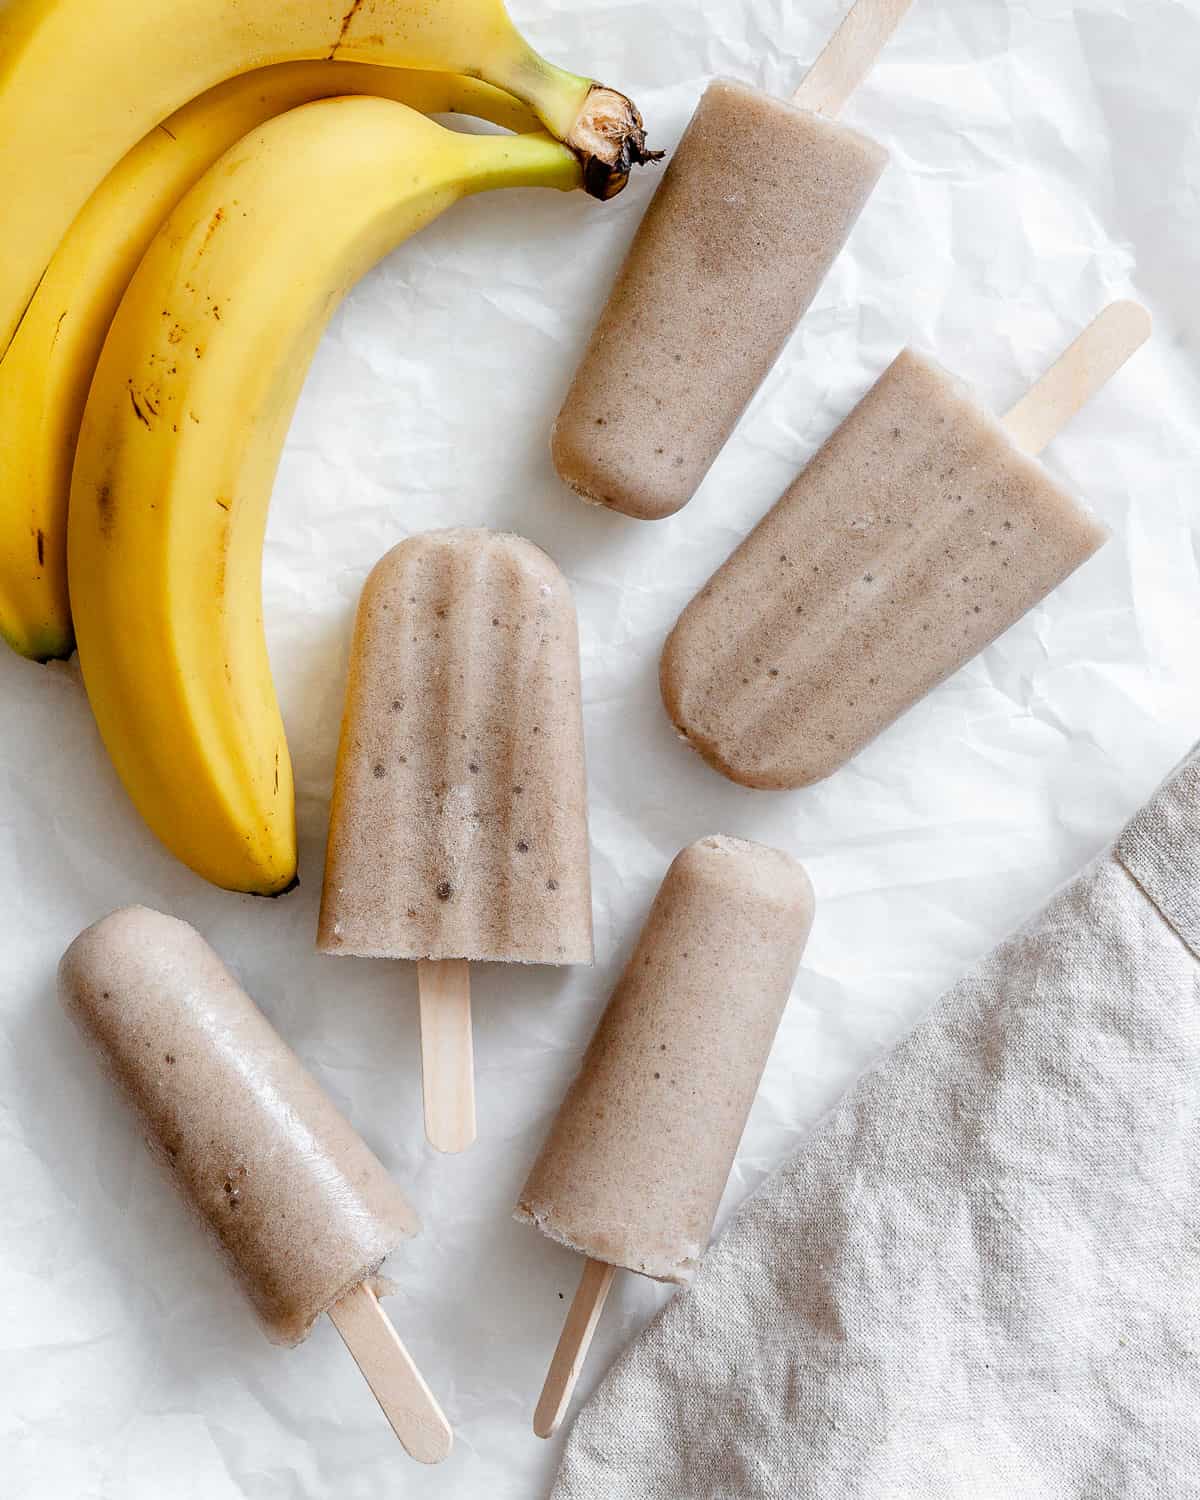 completed Healthy Banana Popsicles against a white surface alongside bananas